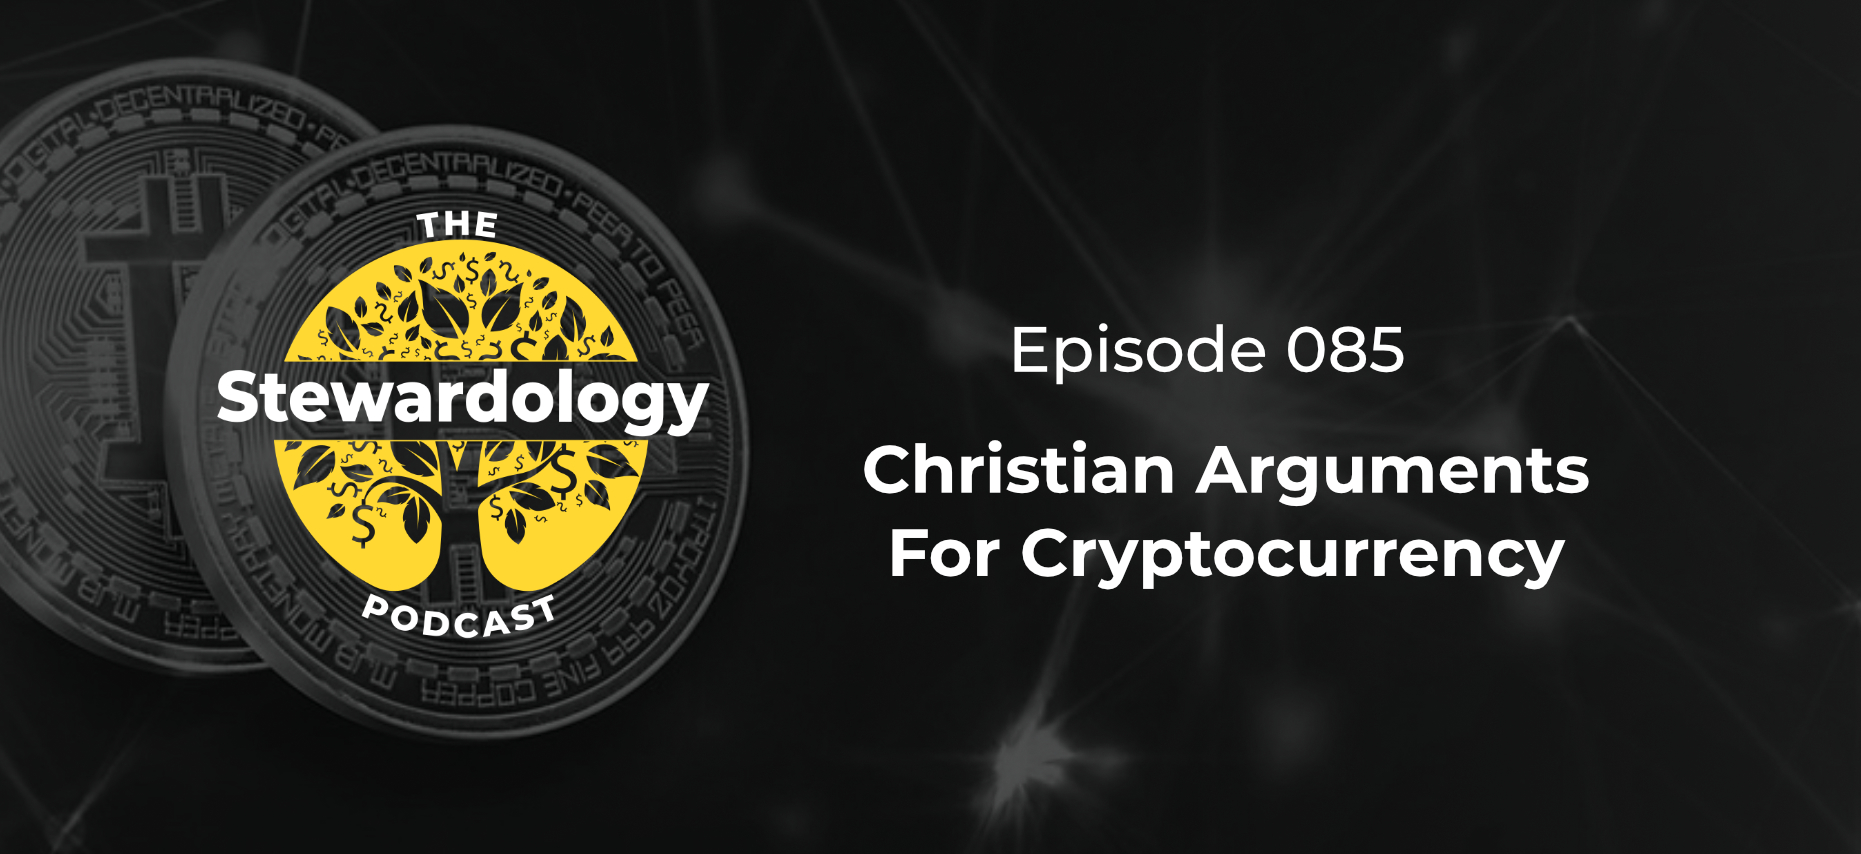 Christian arguments for cryptocurrency